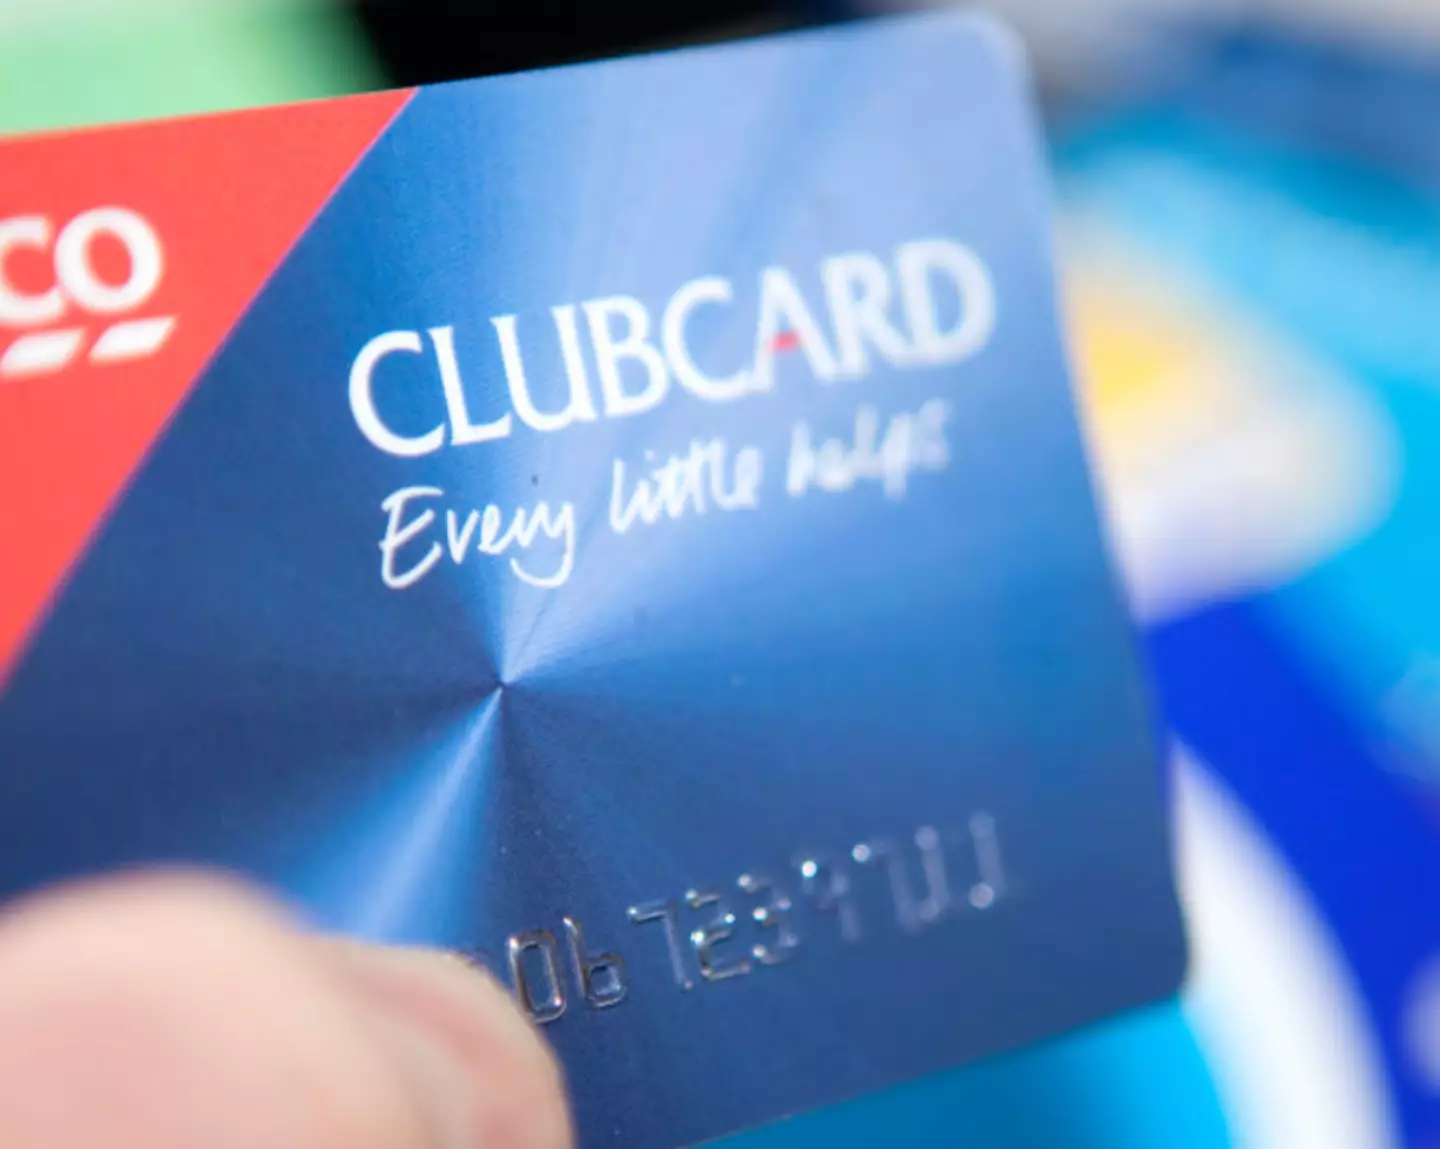 Tesco have sent out a warning about Clubcard points.